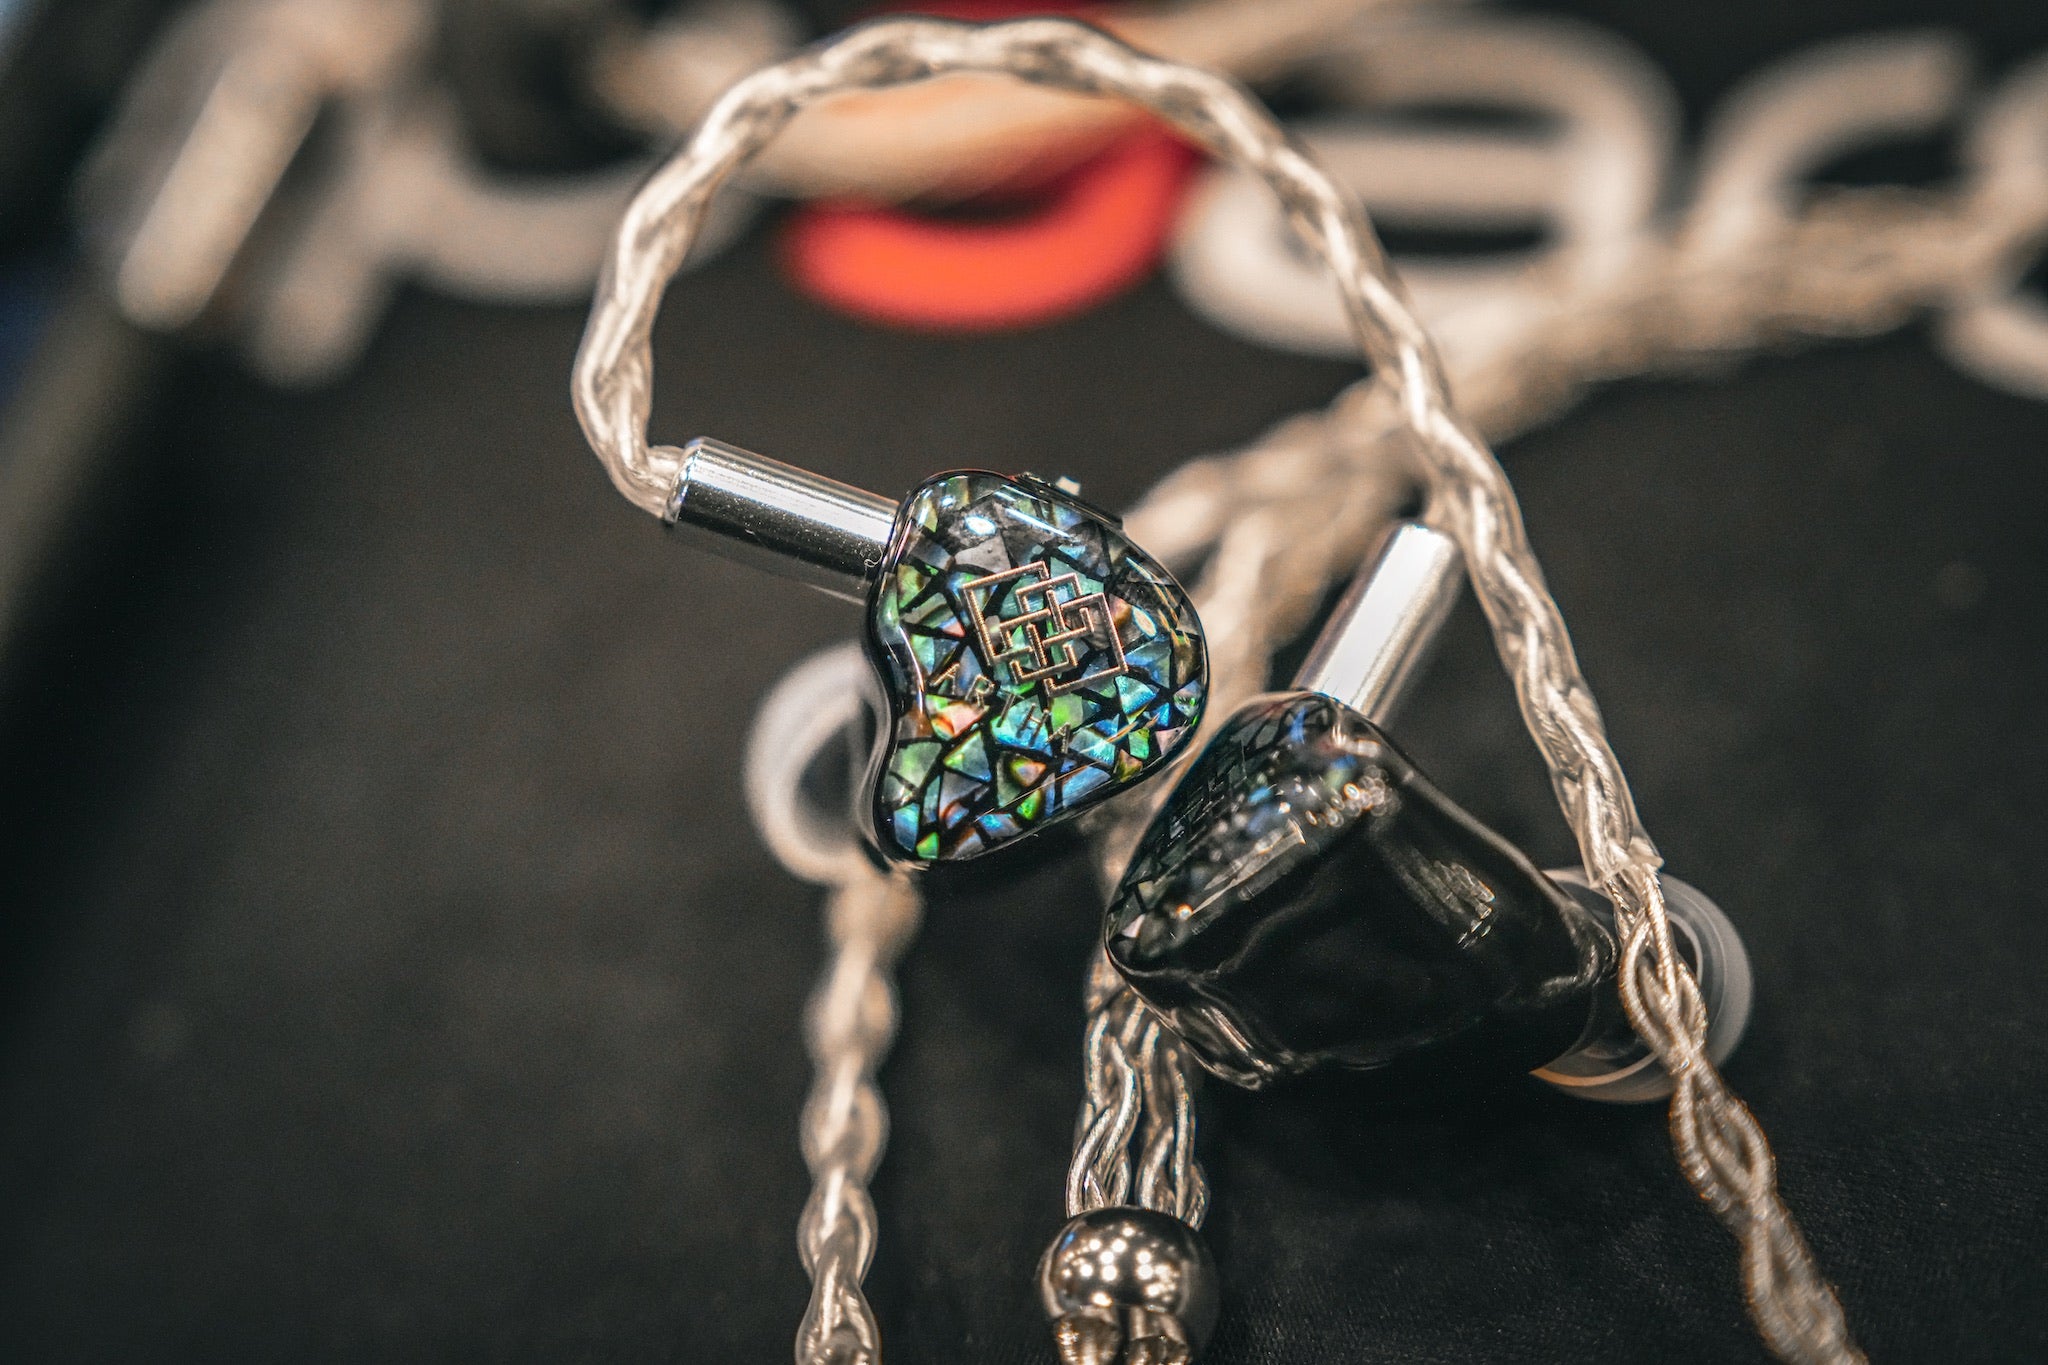 Flip Ears Artha in ear monitor on display at CanJam SoCal 2023, from the Bloom Audio gallery